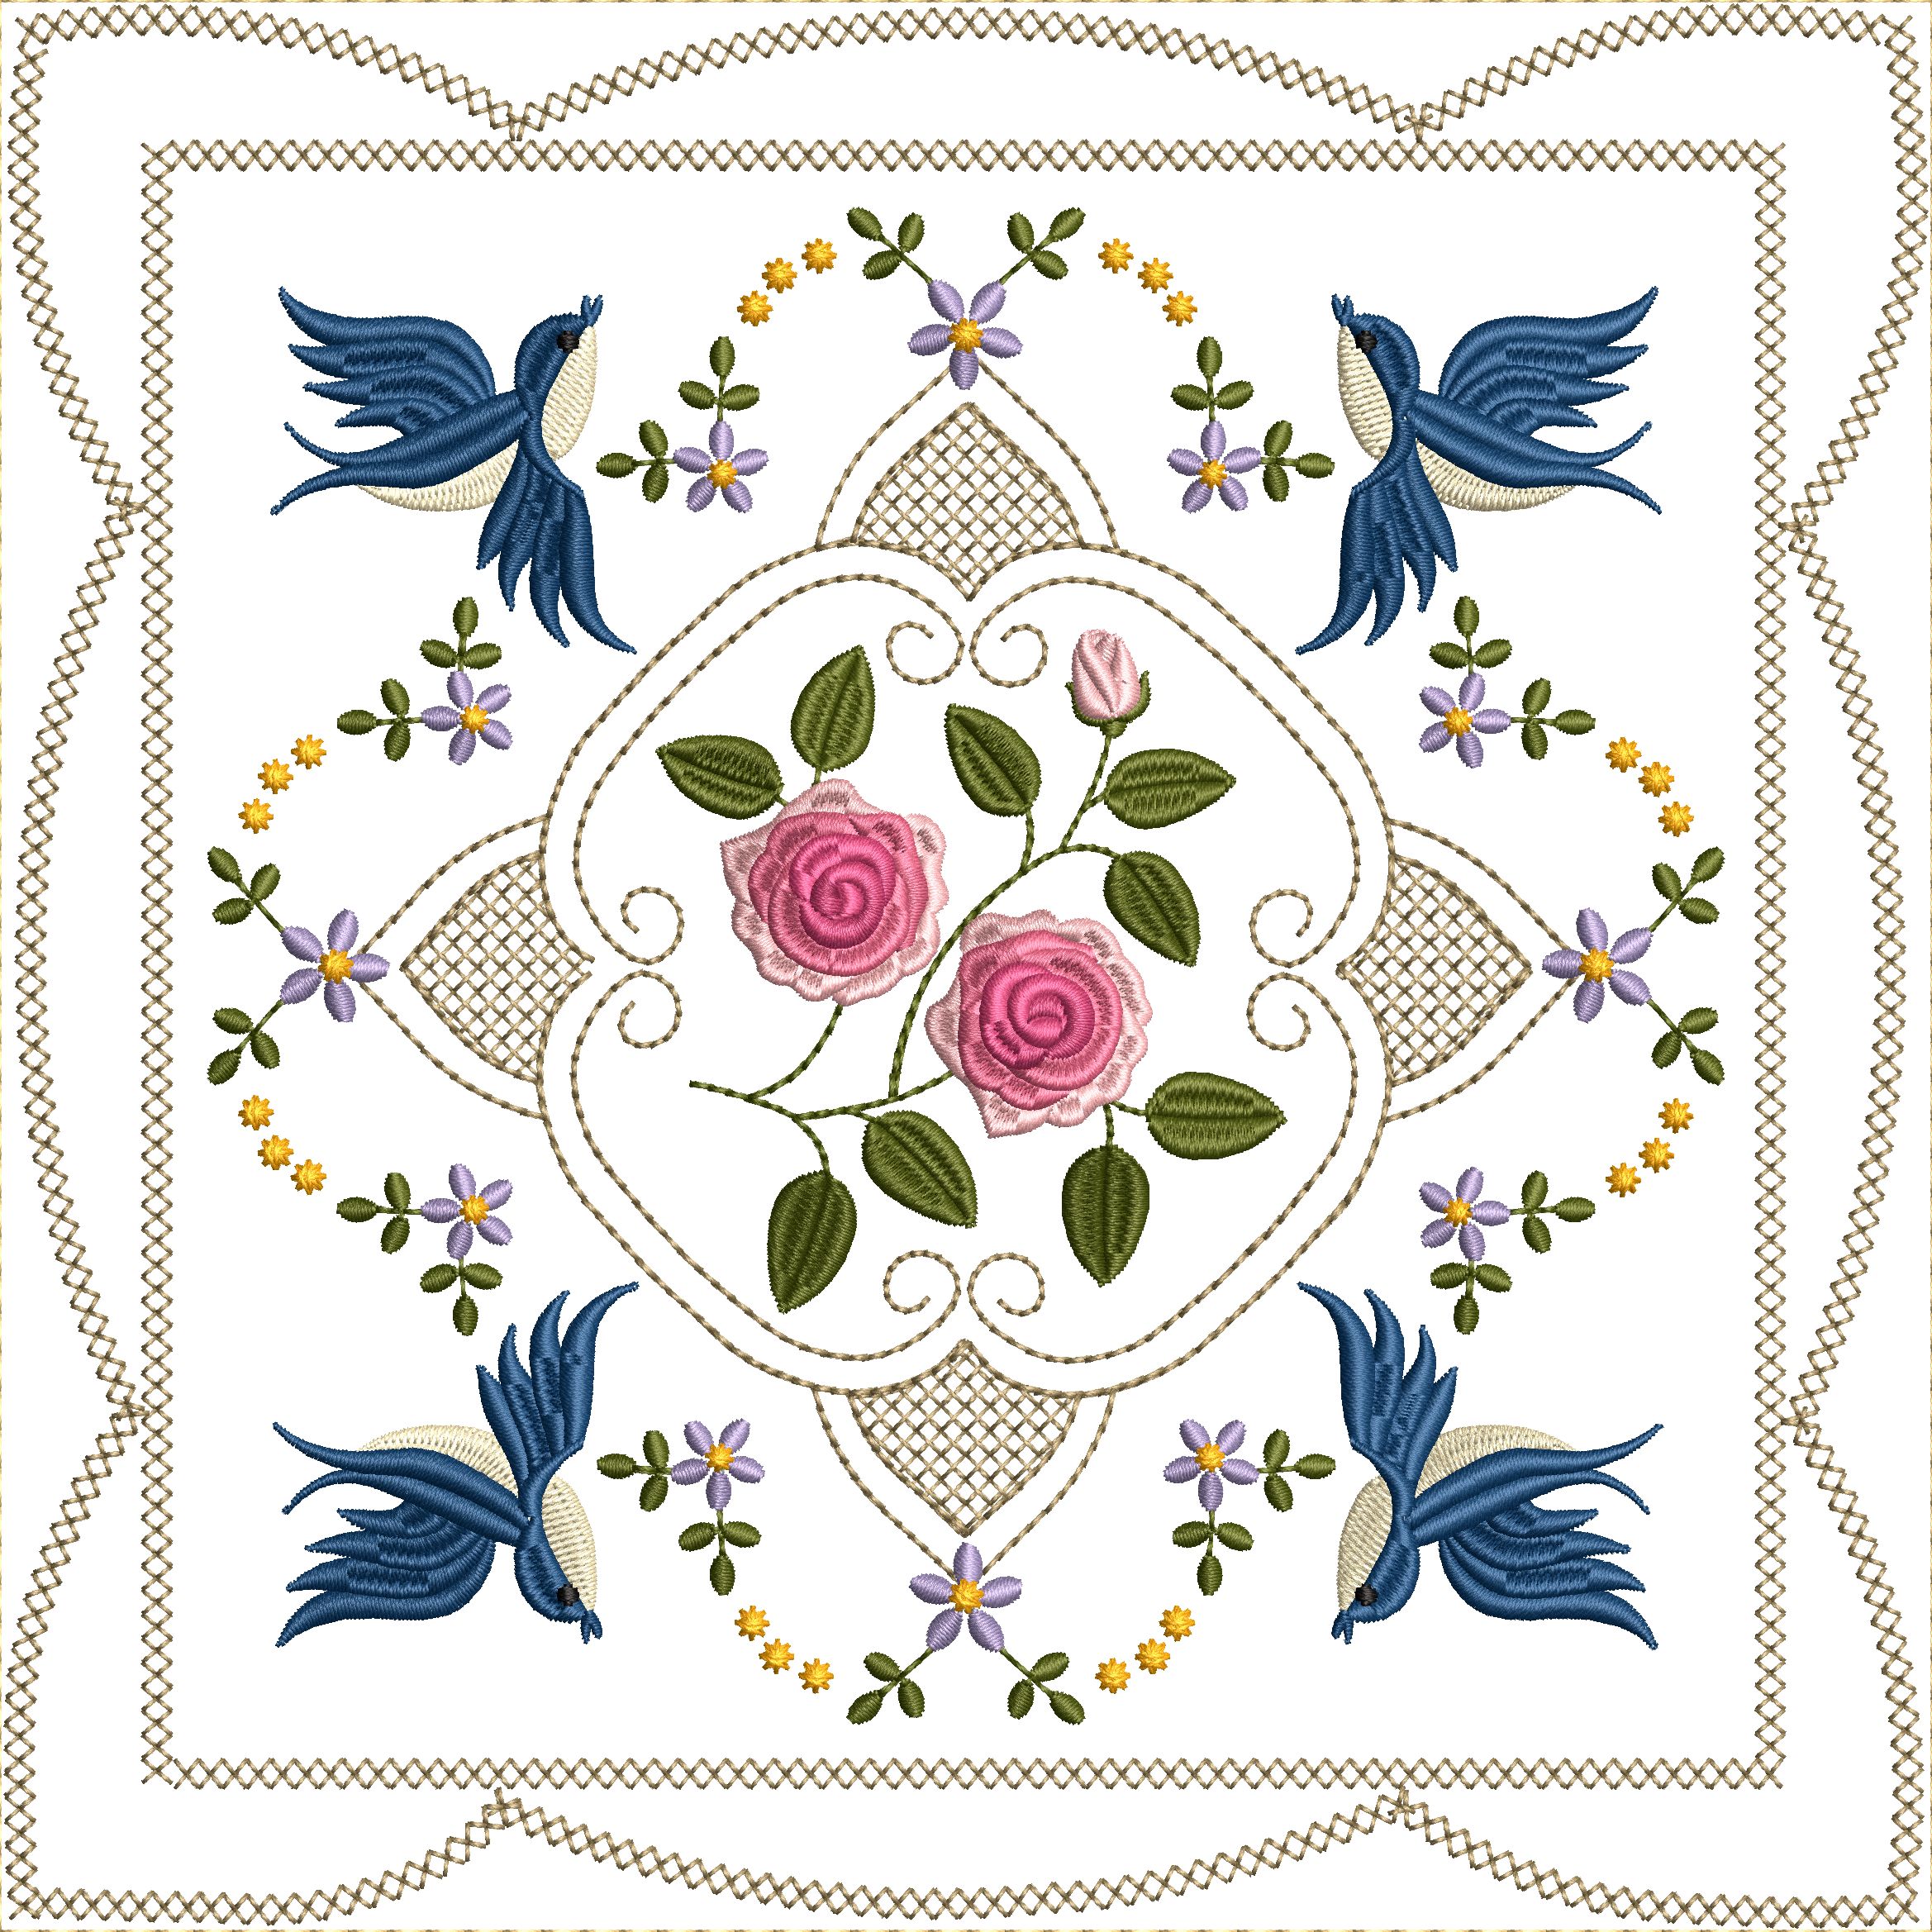 Bluebirds and Roses Quilt Blocks 8x8-18